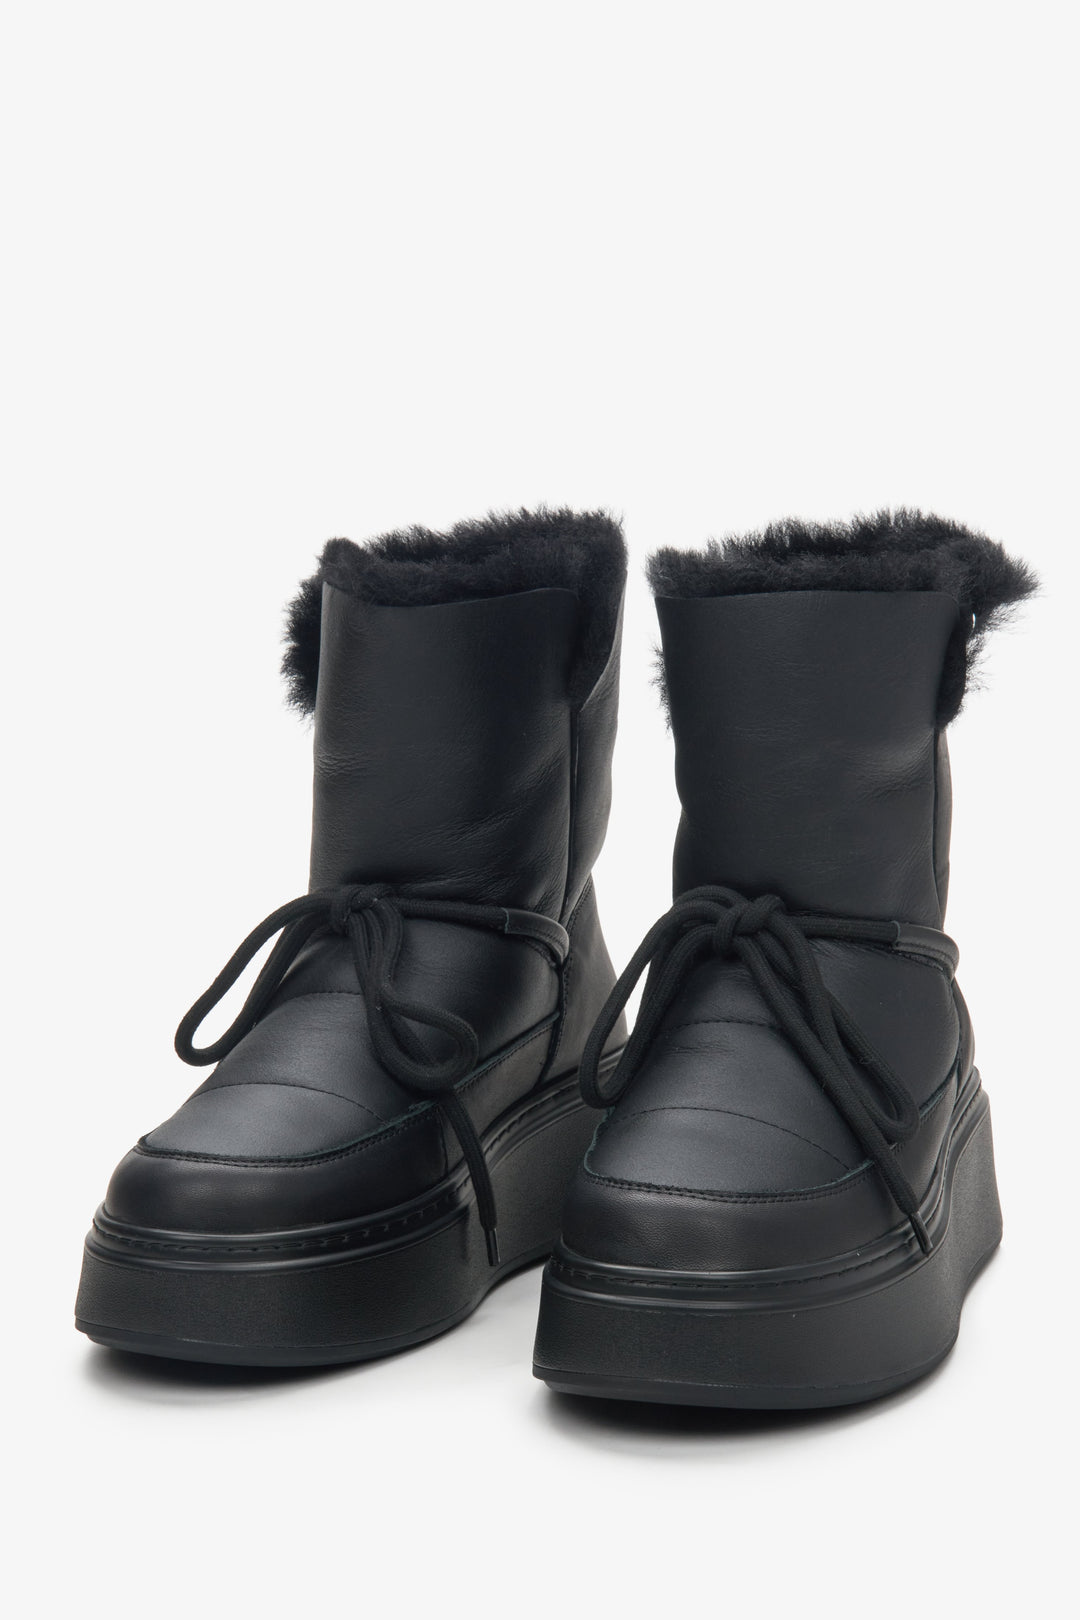 Women's black leather snow boots Estro - a cloes-up at the tip of the toe.